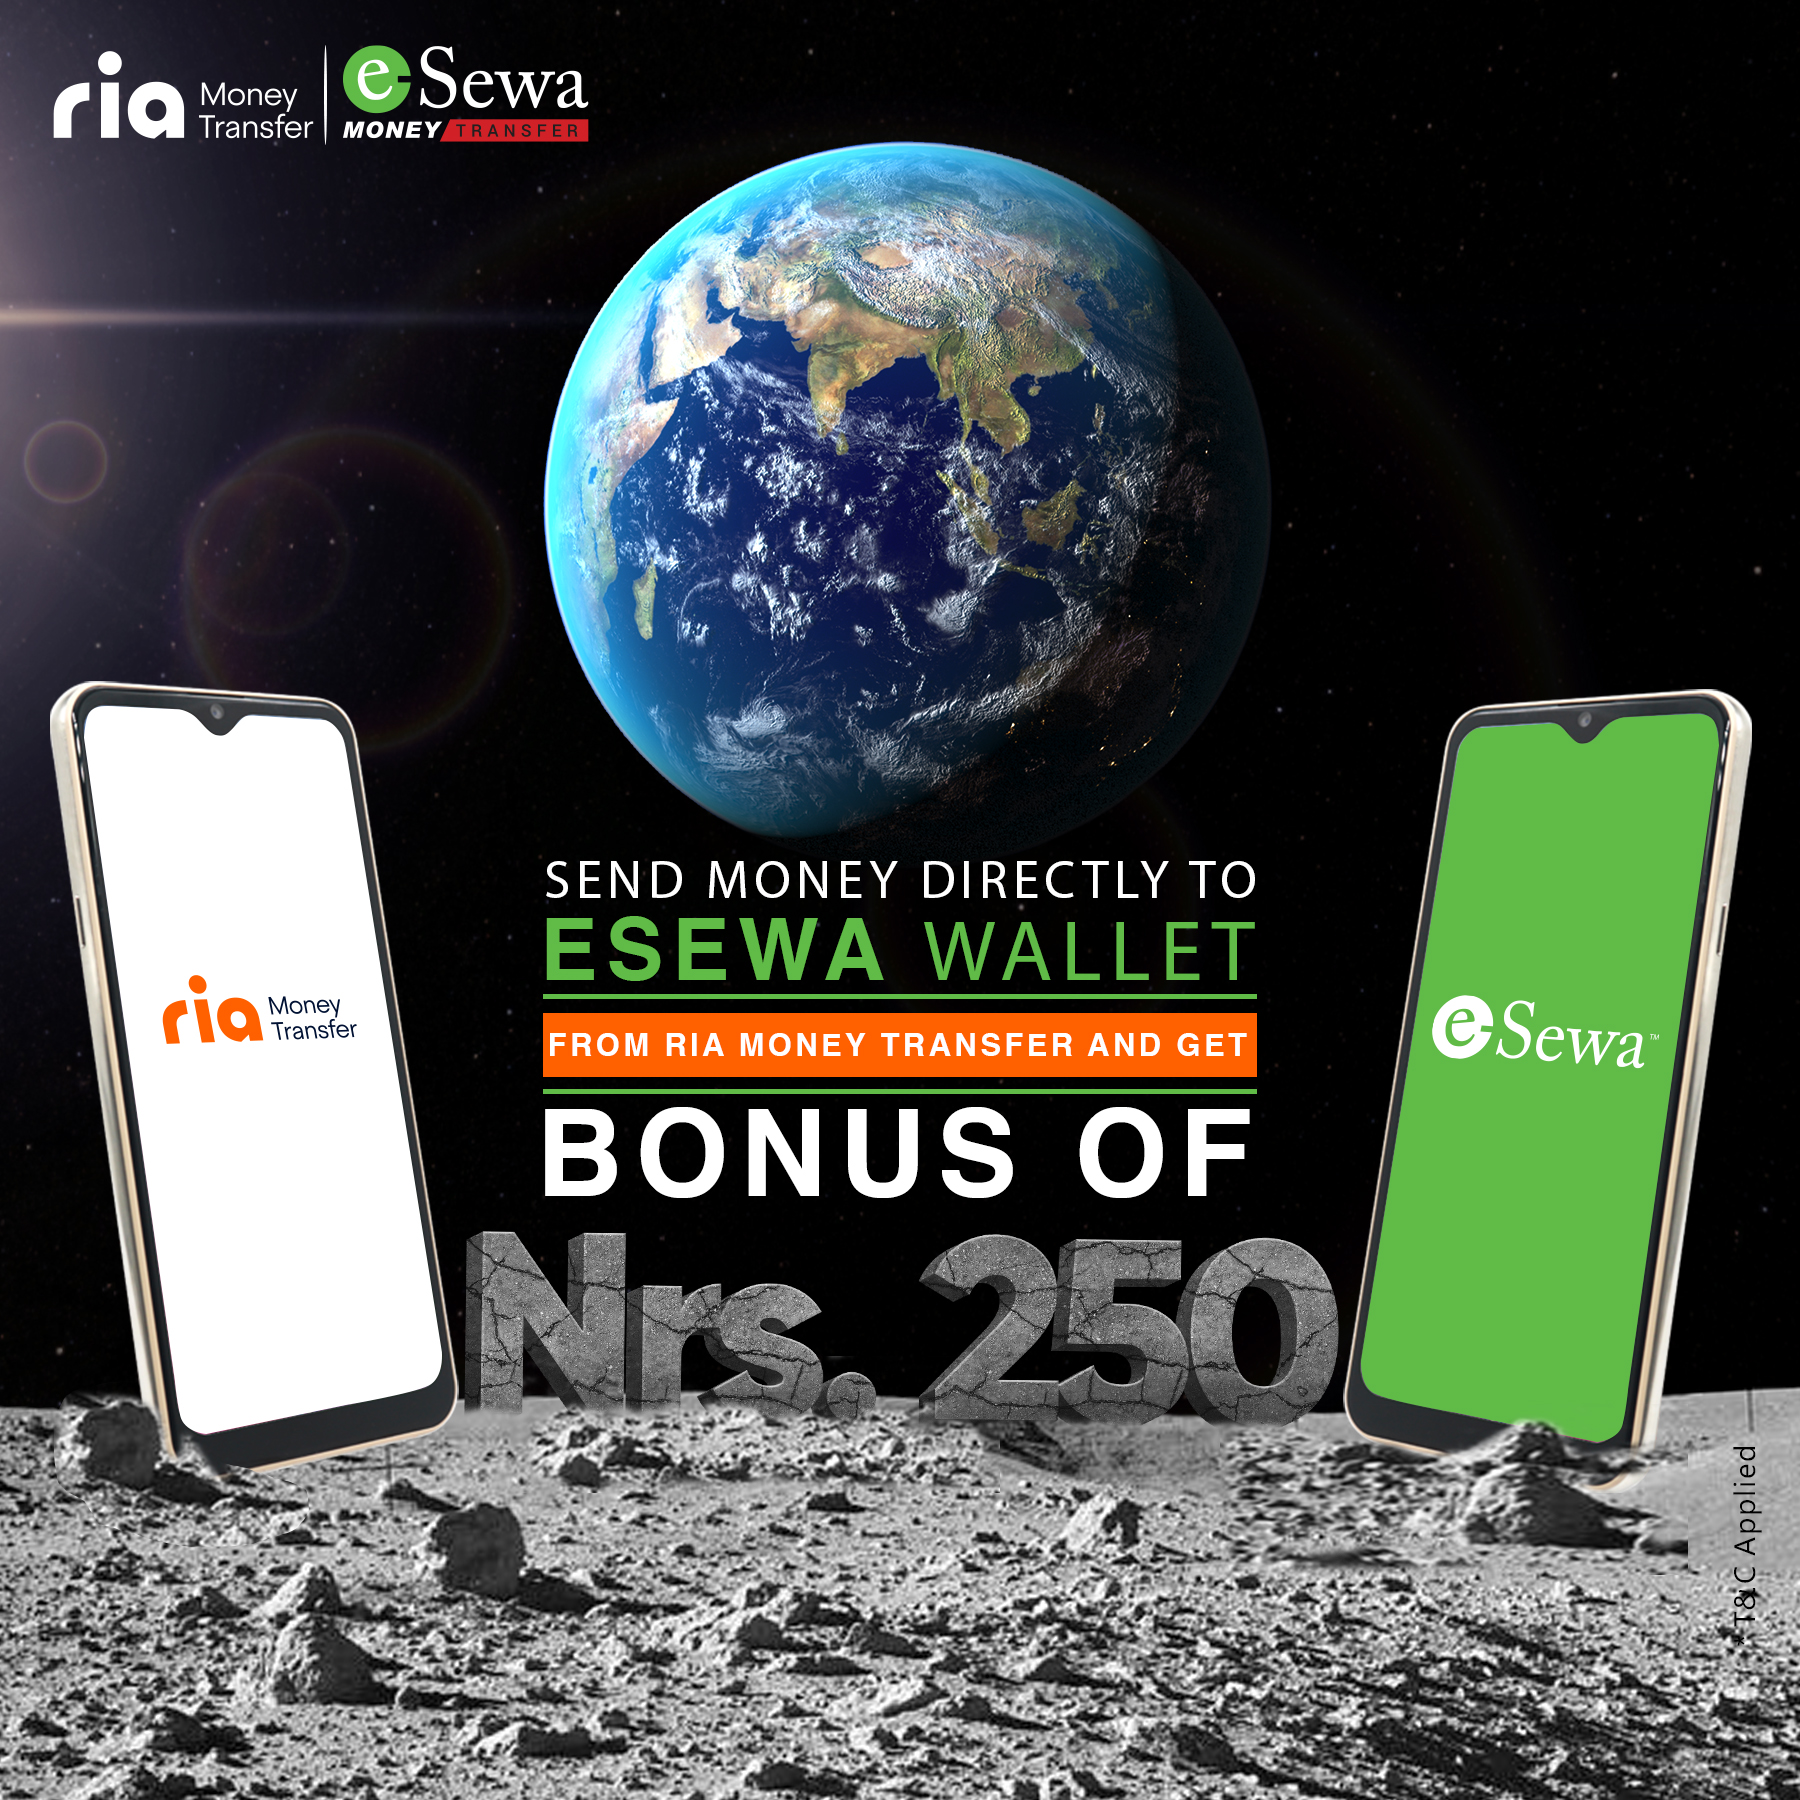 Rs. 250 bonus on offer while sending remittance directly from Ria Money Transfer to eSewa Wallet. - Featured Image